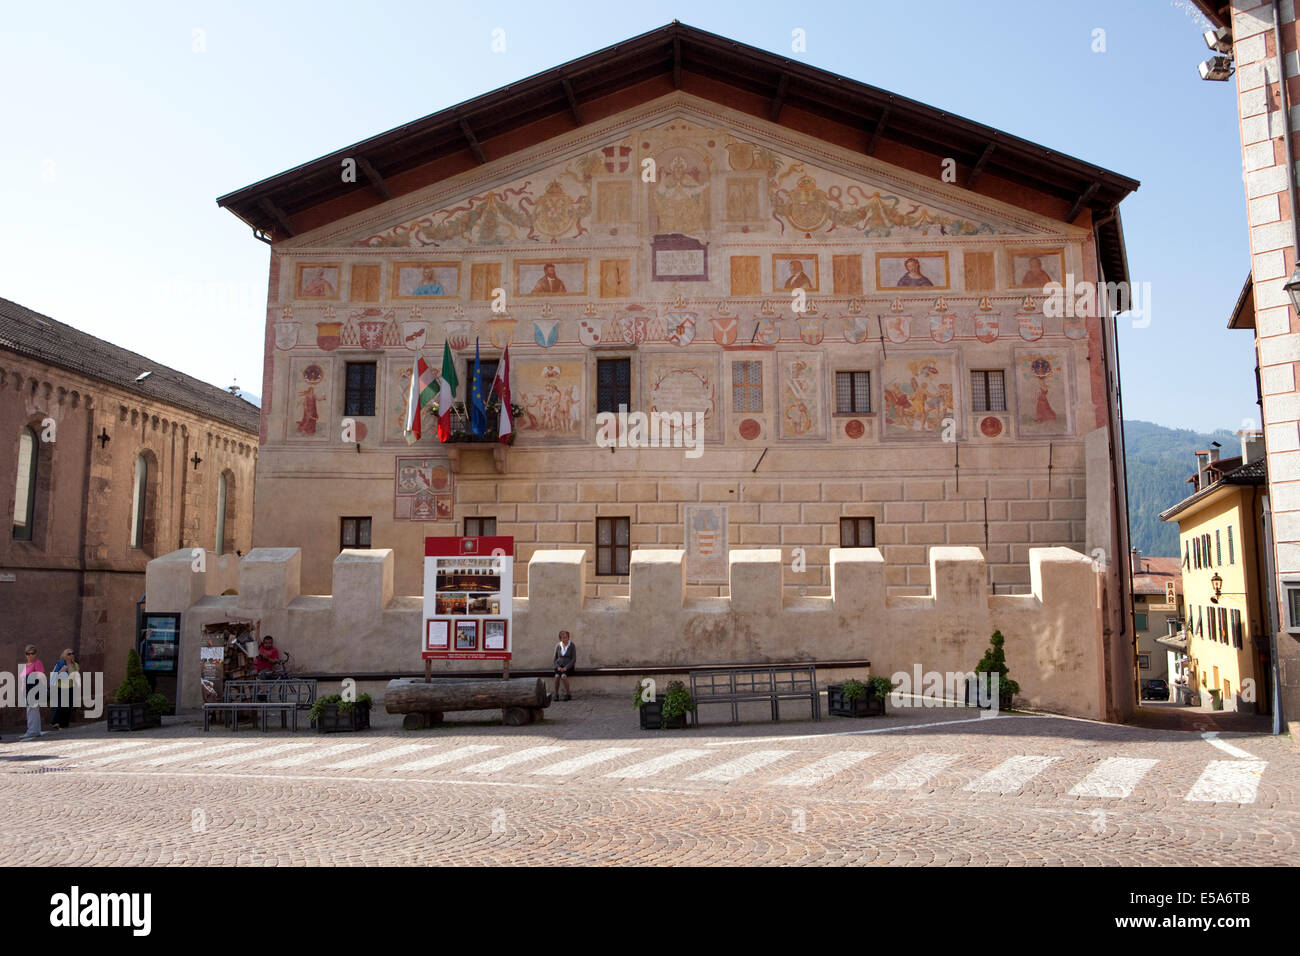 The painted facade of the old town hall Magnifica Comunità di Fiemme in Cavalese, Italy Stock Photo